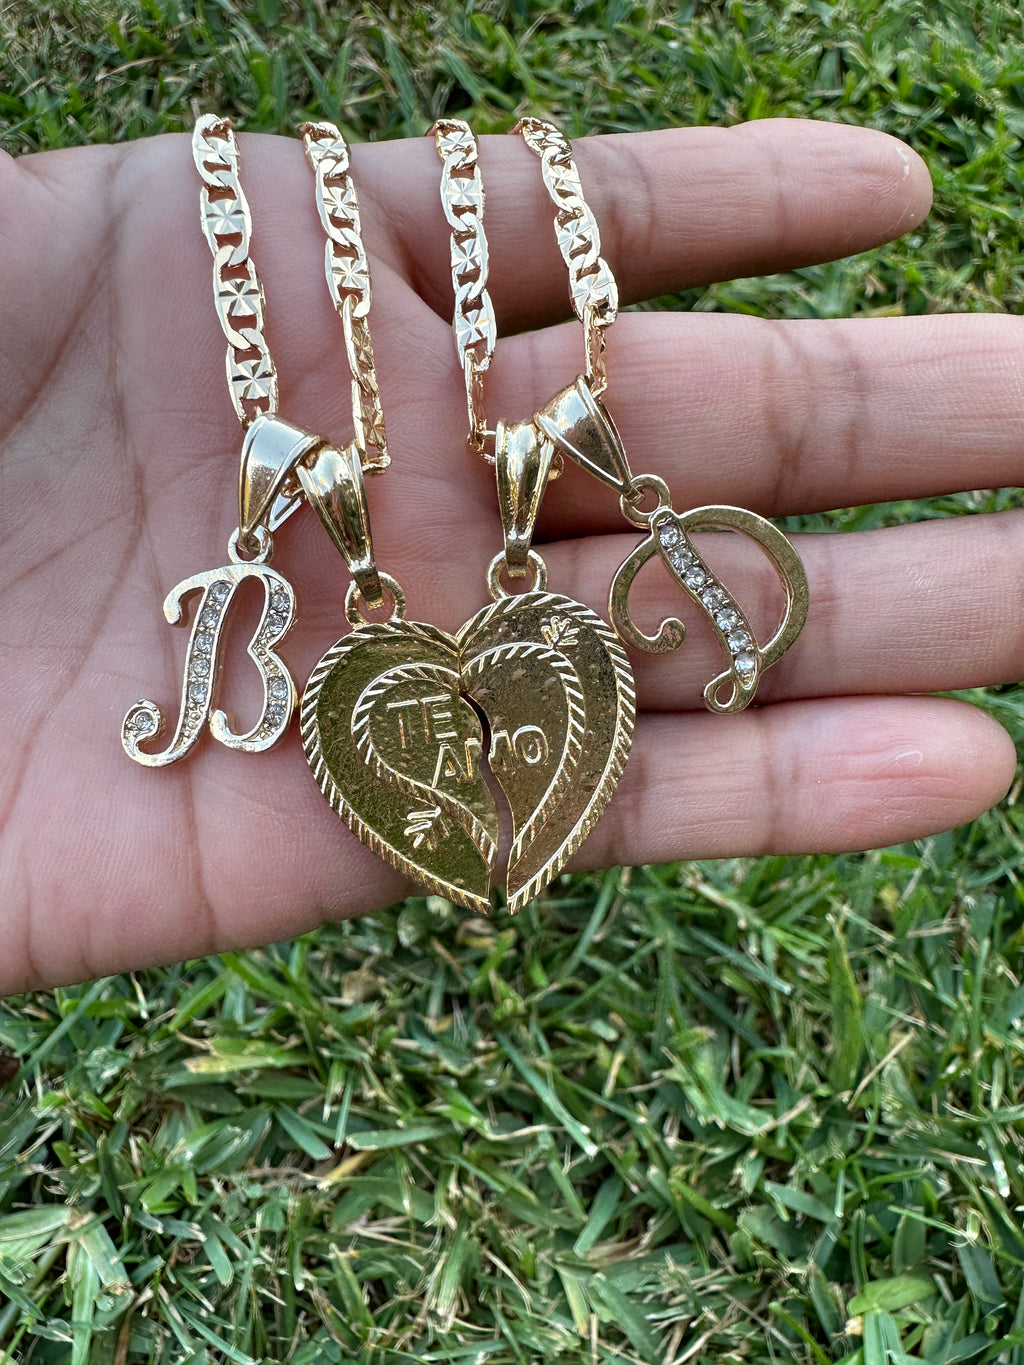 “4ever” Heart Half's Necklace Set for Couples